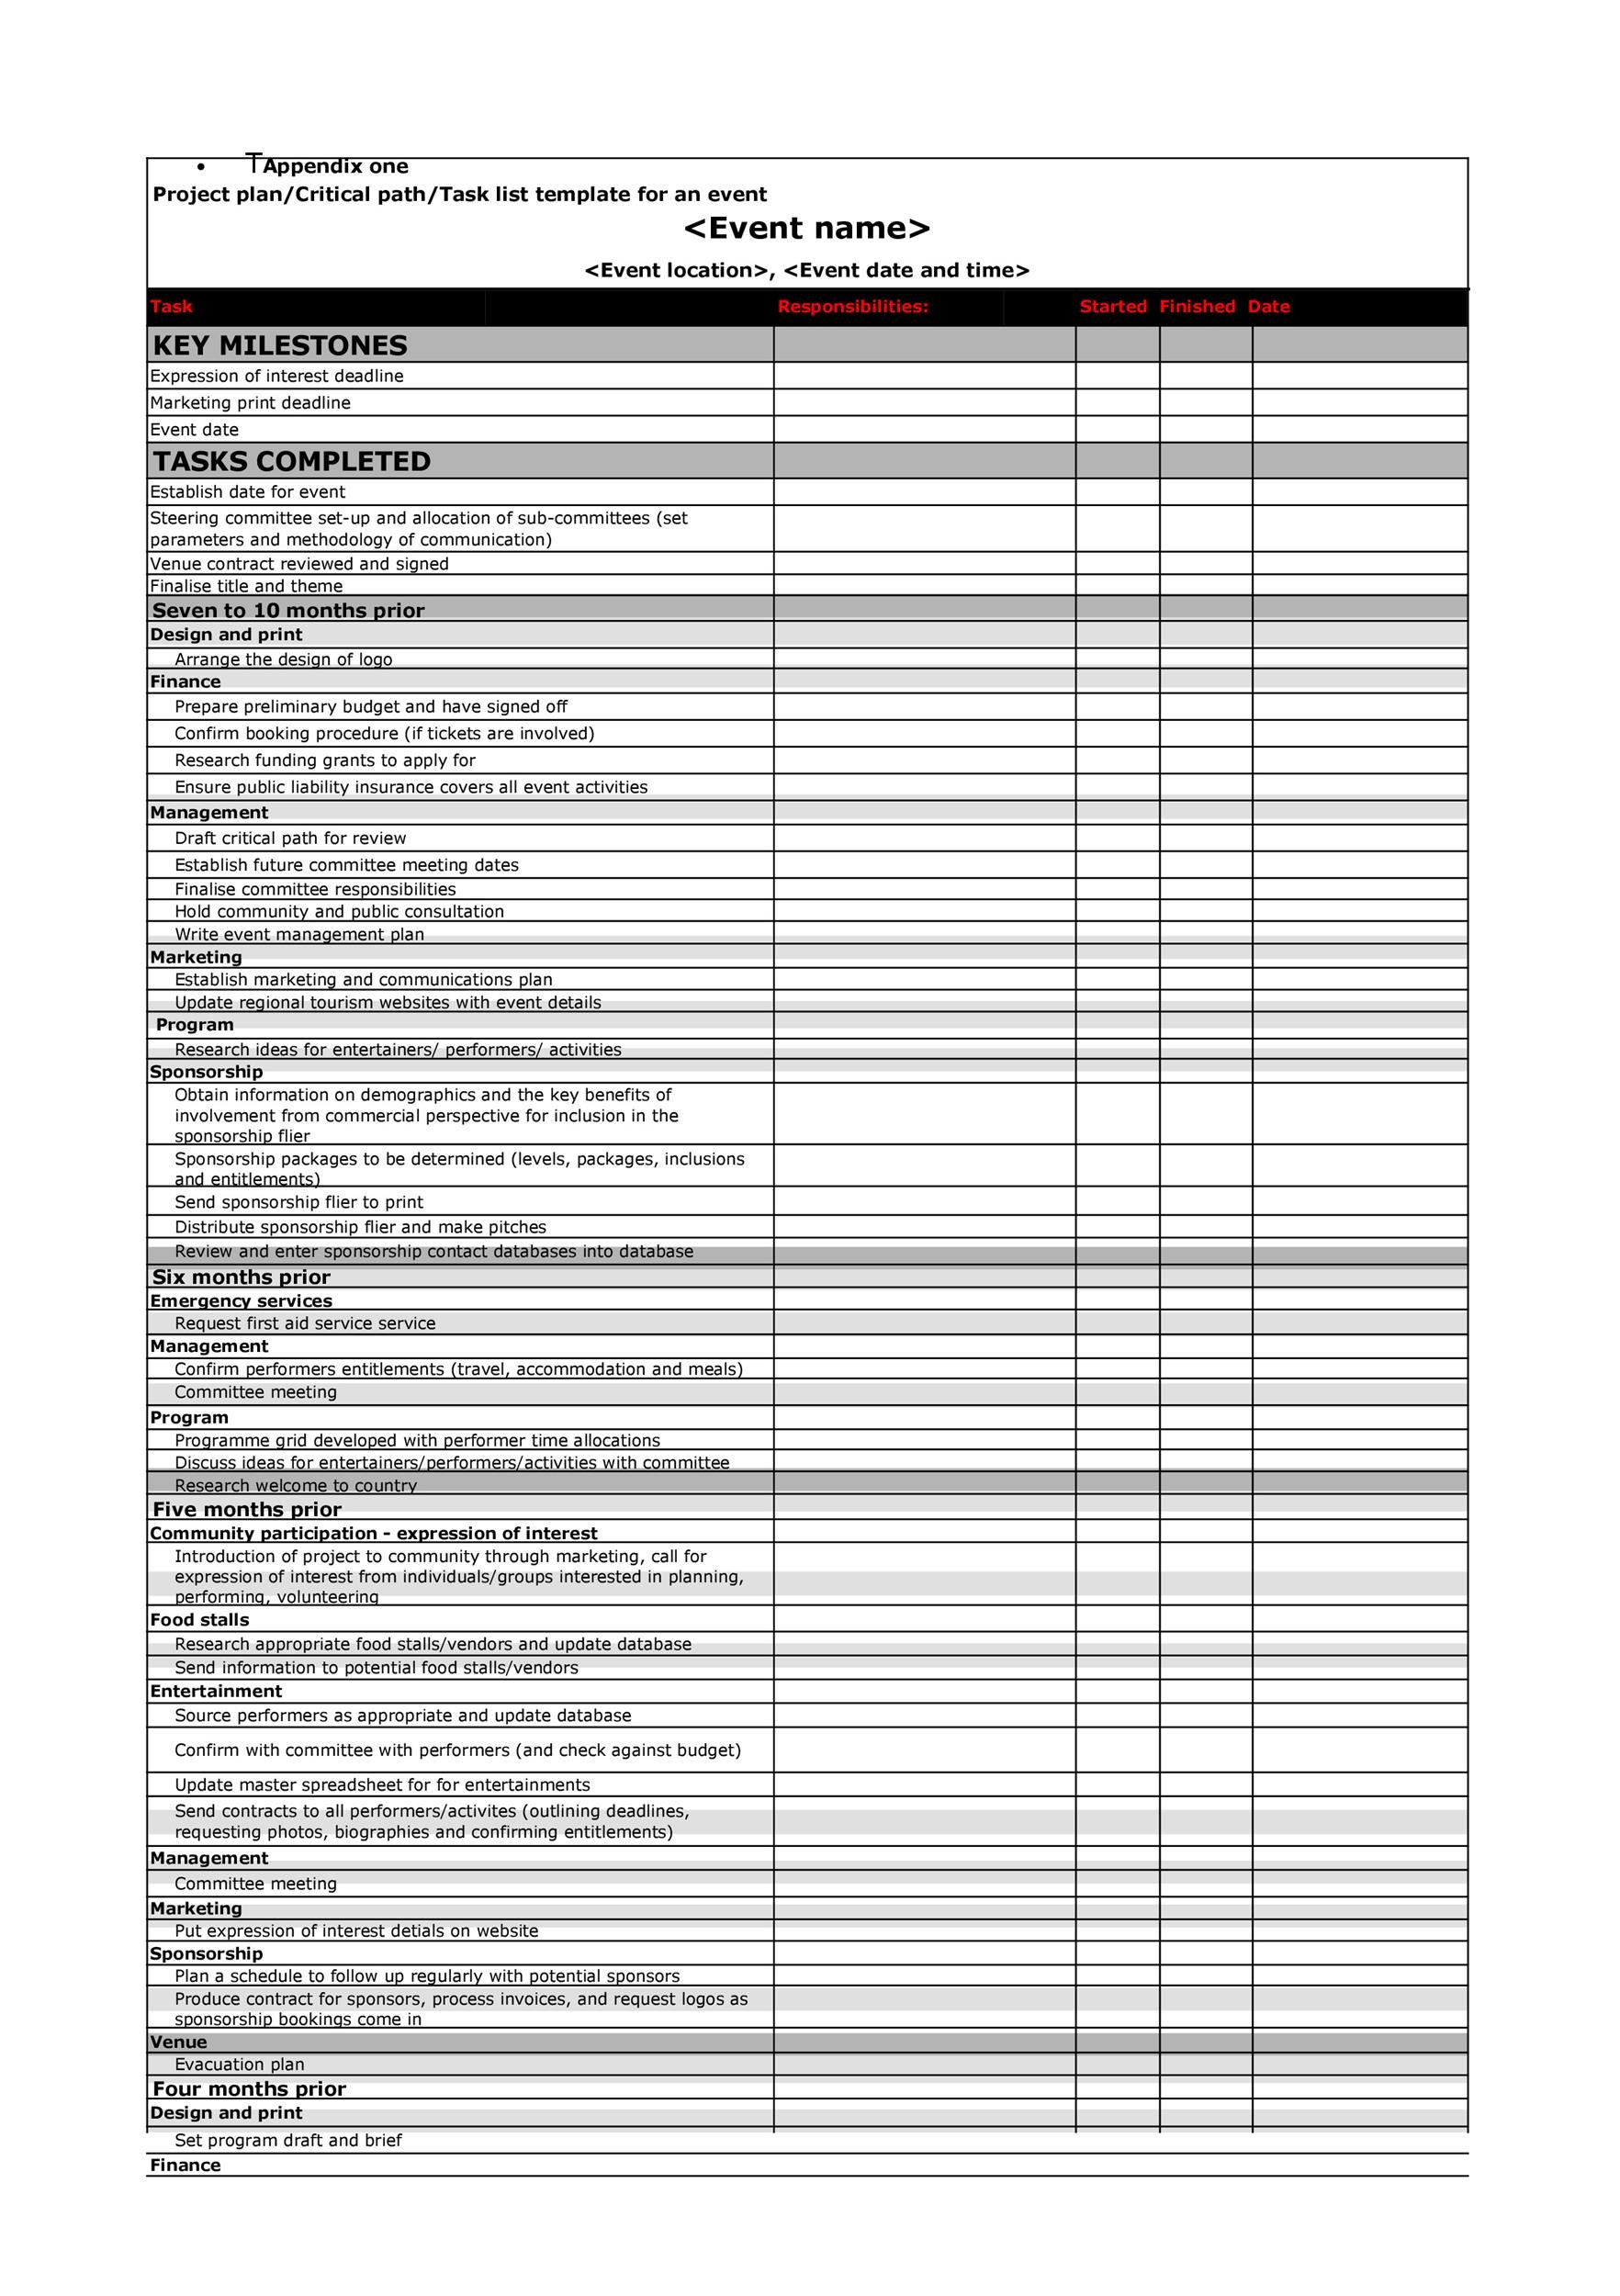 11 Professional Event Planning Checklist Templates ᐅ TemplateLab In Corporate Event Checklist Template Throughout Corporate Event Checklist Template